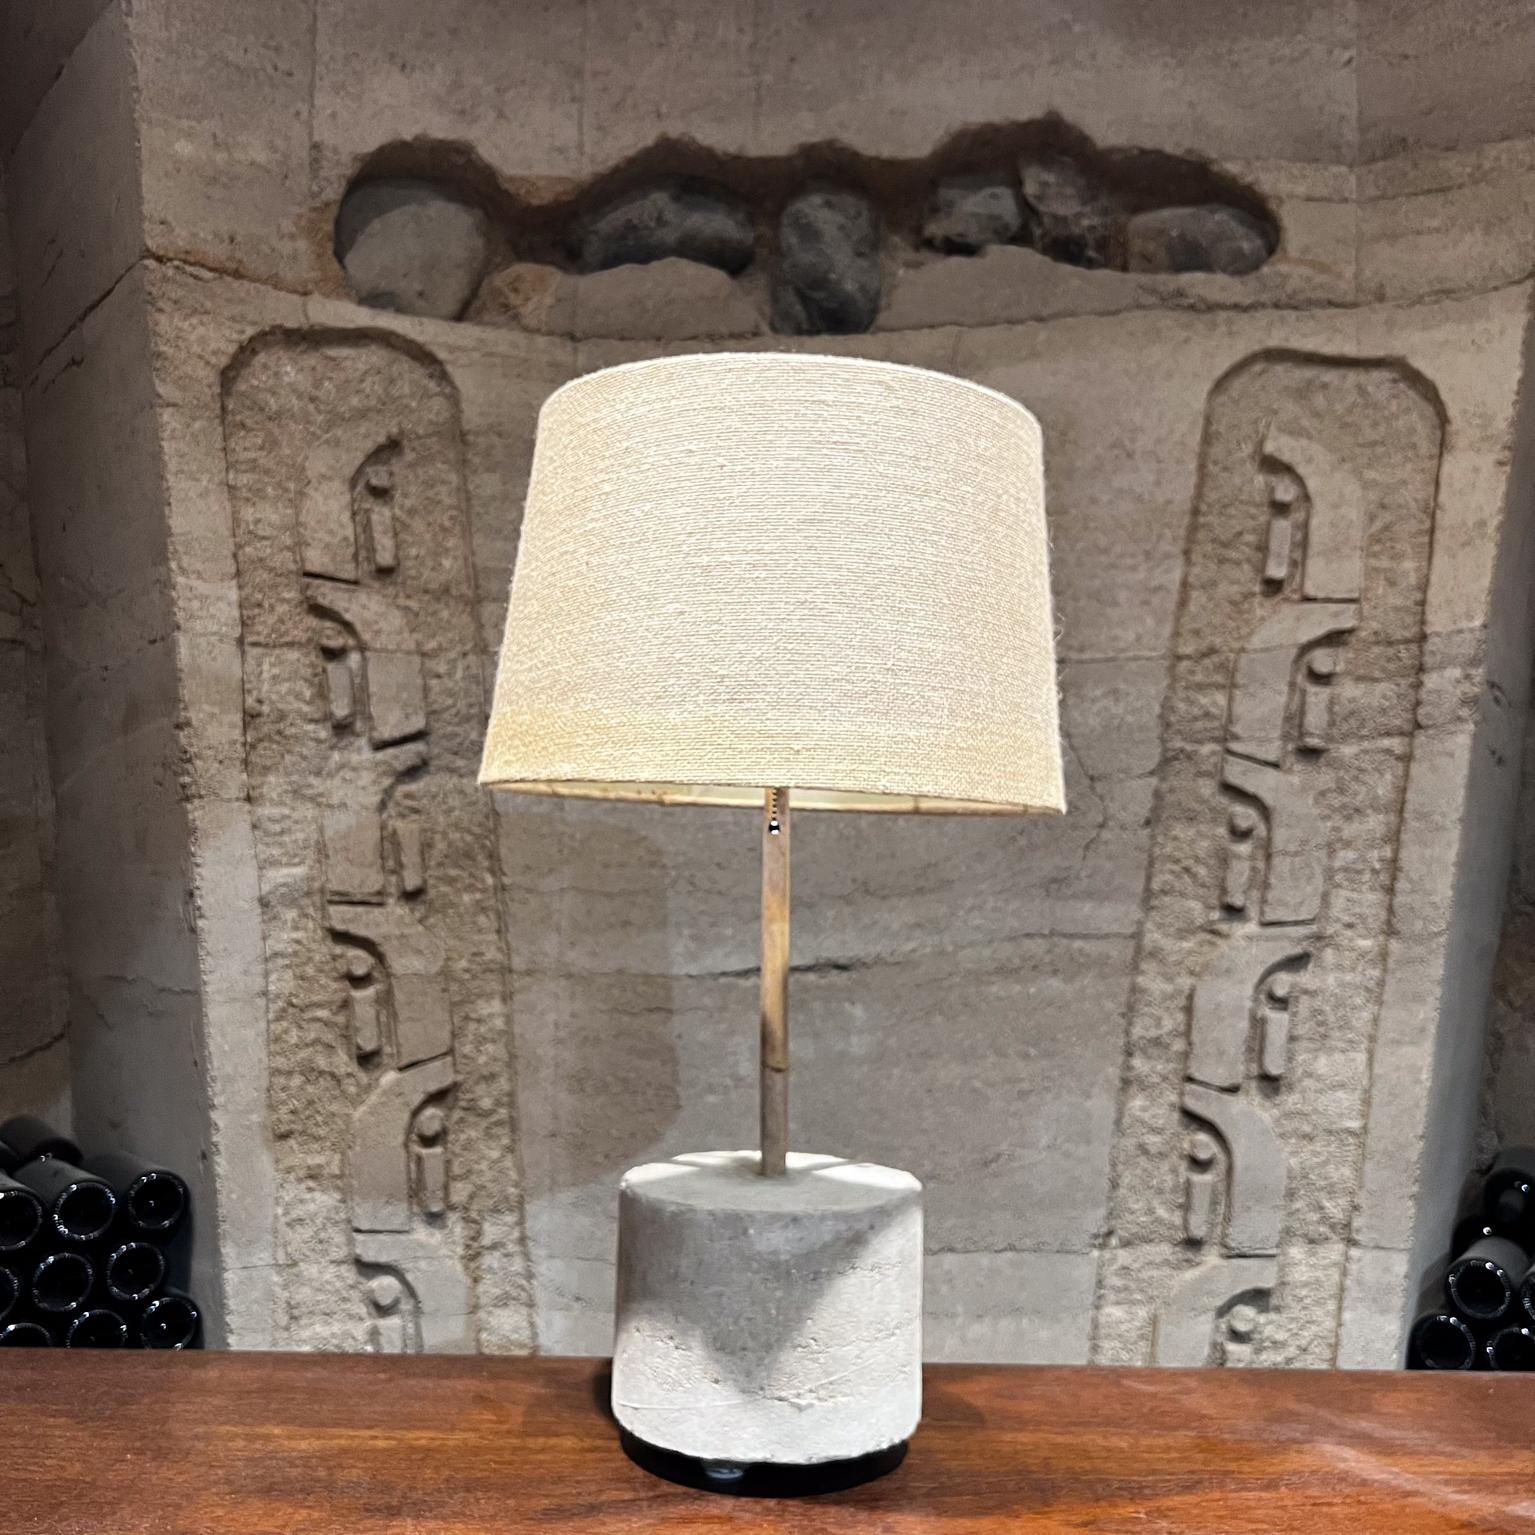 Contemporary Table Lamp Rammed Earth & Bamboo Pablo Romo design In Good Condition For Sale In Chula Vista, CA